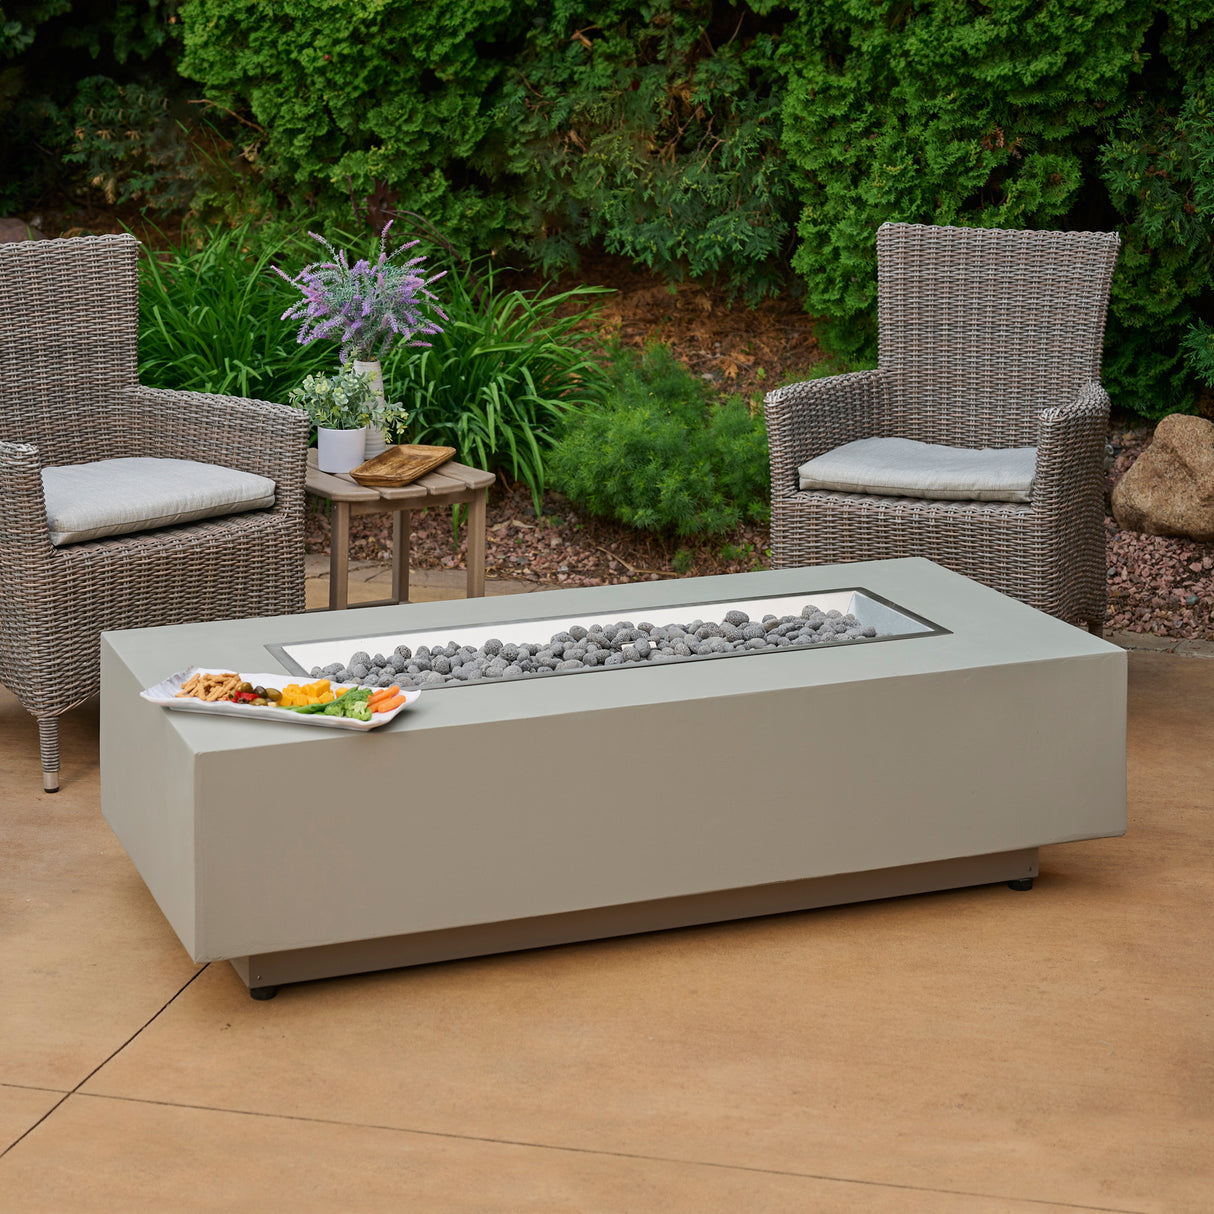 The Harbor View Rectangular Gas Fire Pit Table in a patio setting with food placed on the top of the table